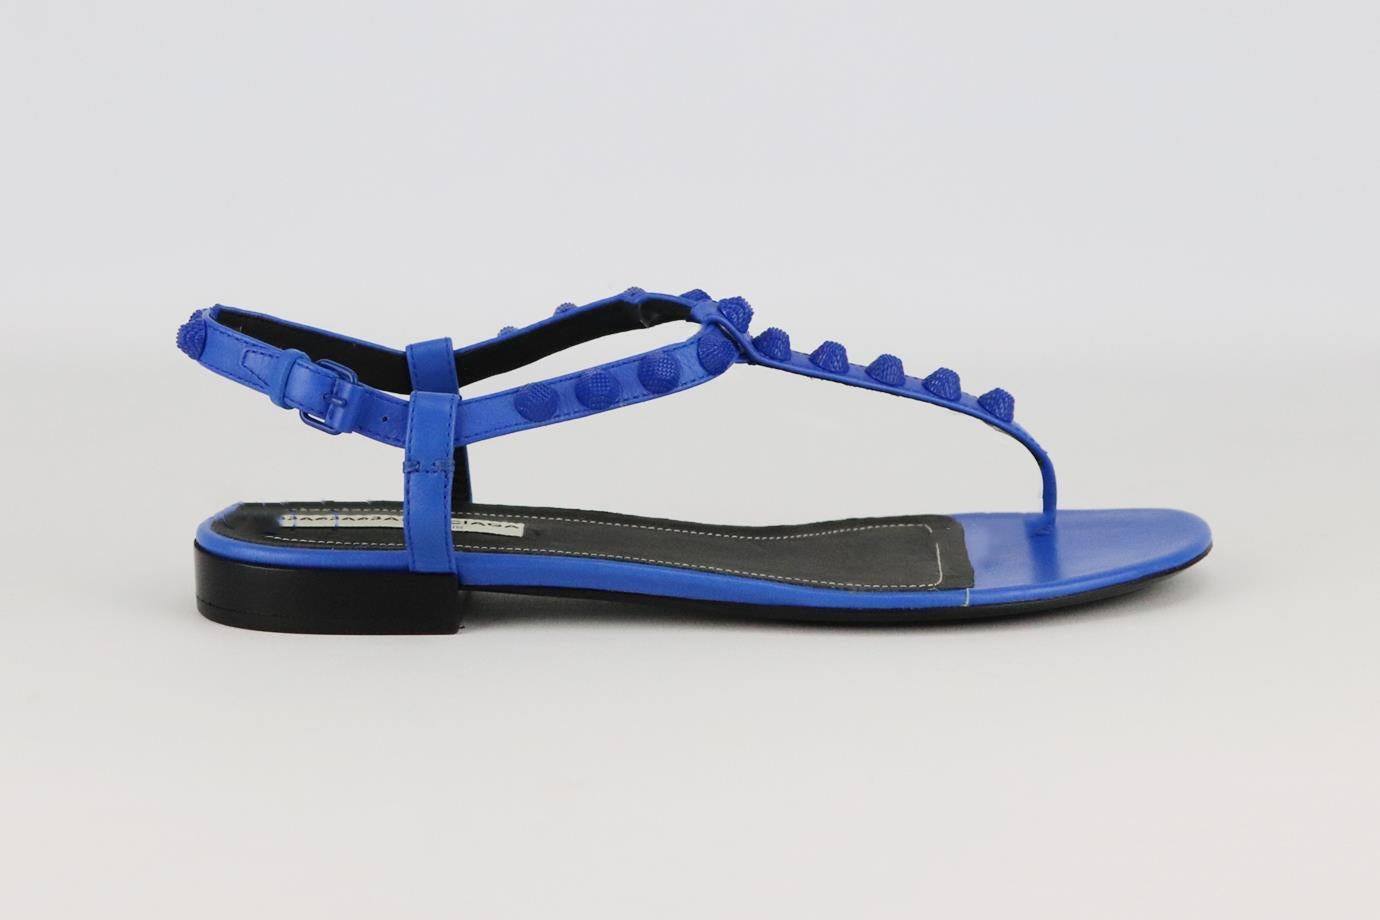 Balenciaga studded leather sandals. Blue. Buckle fastening at side. Does not come with box or dustbag. Size: EU 38.5 (UK 5.5, US 8.5). Insole: 9.6 in. Heel: 0.5 in
